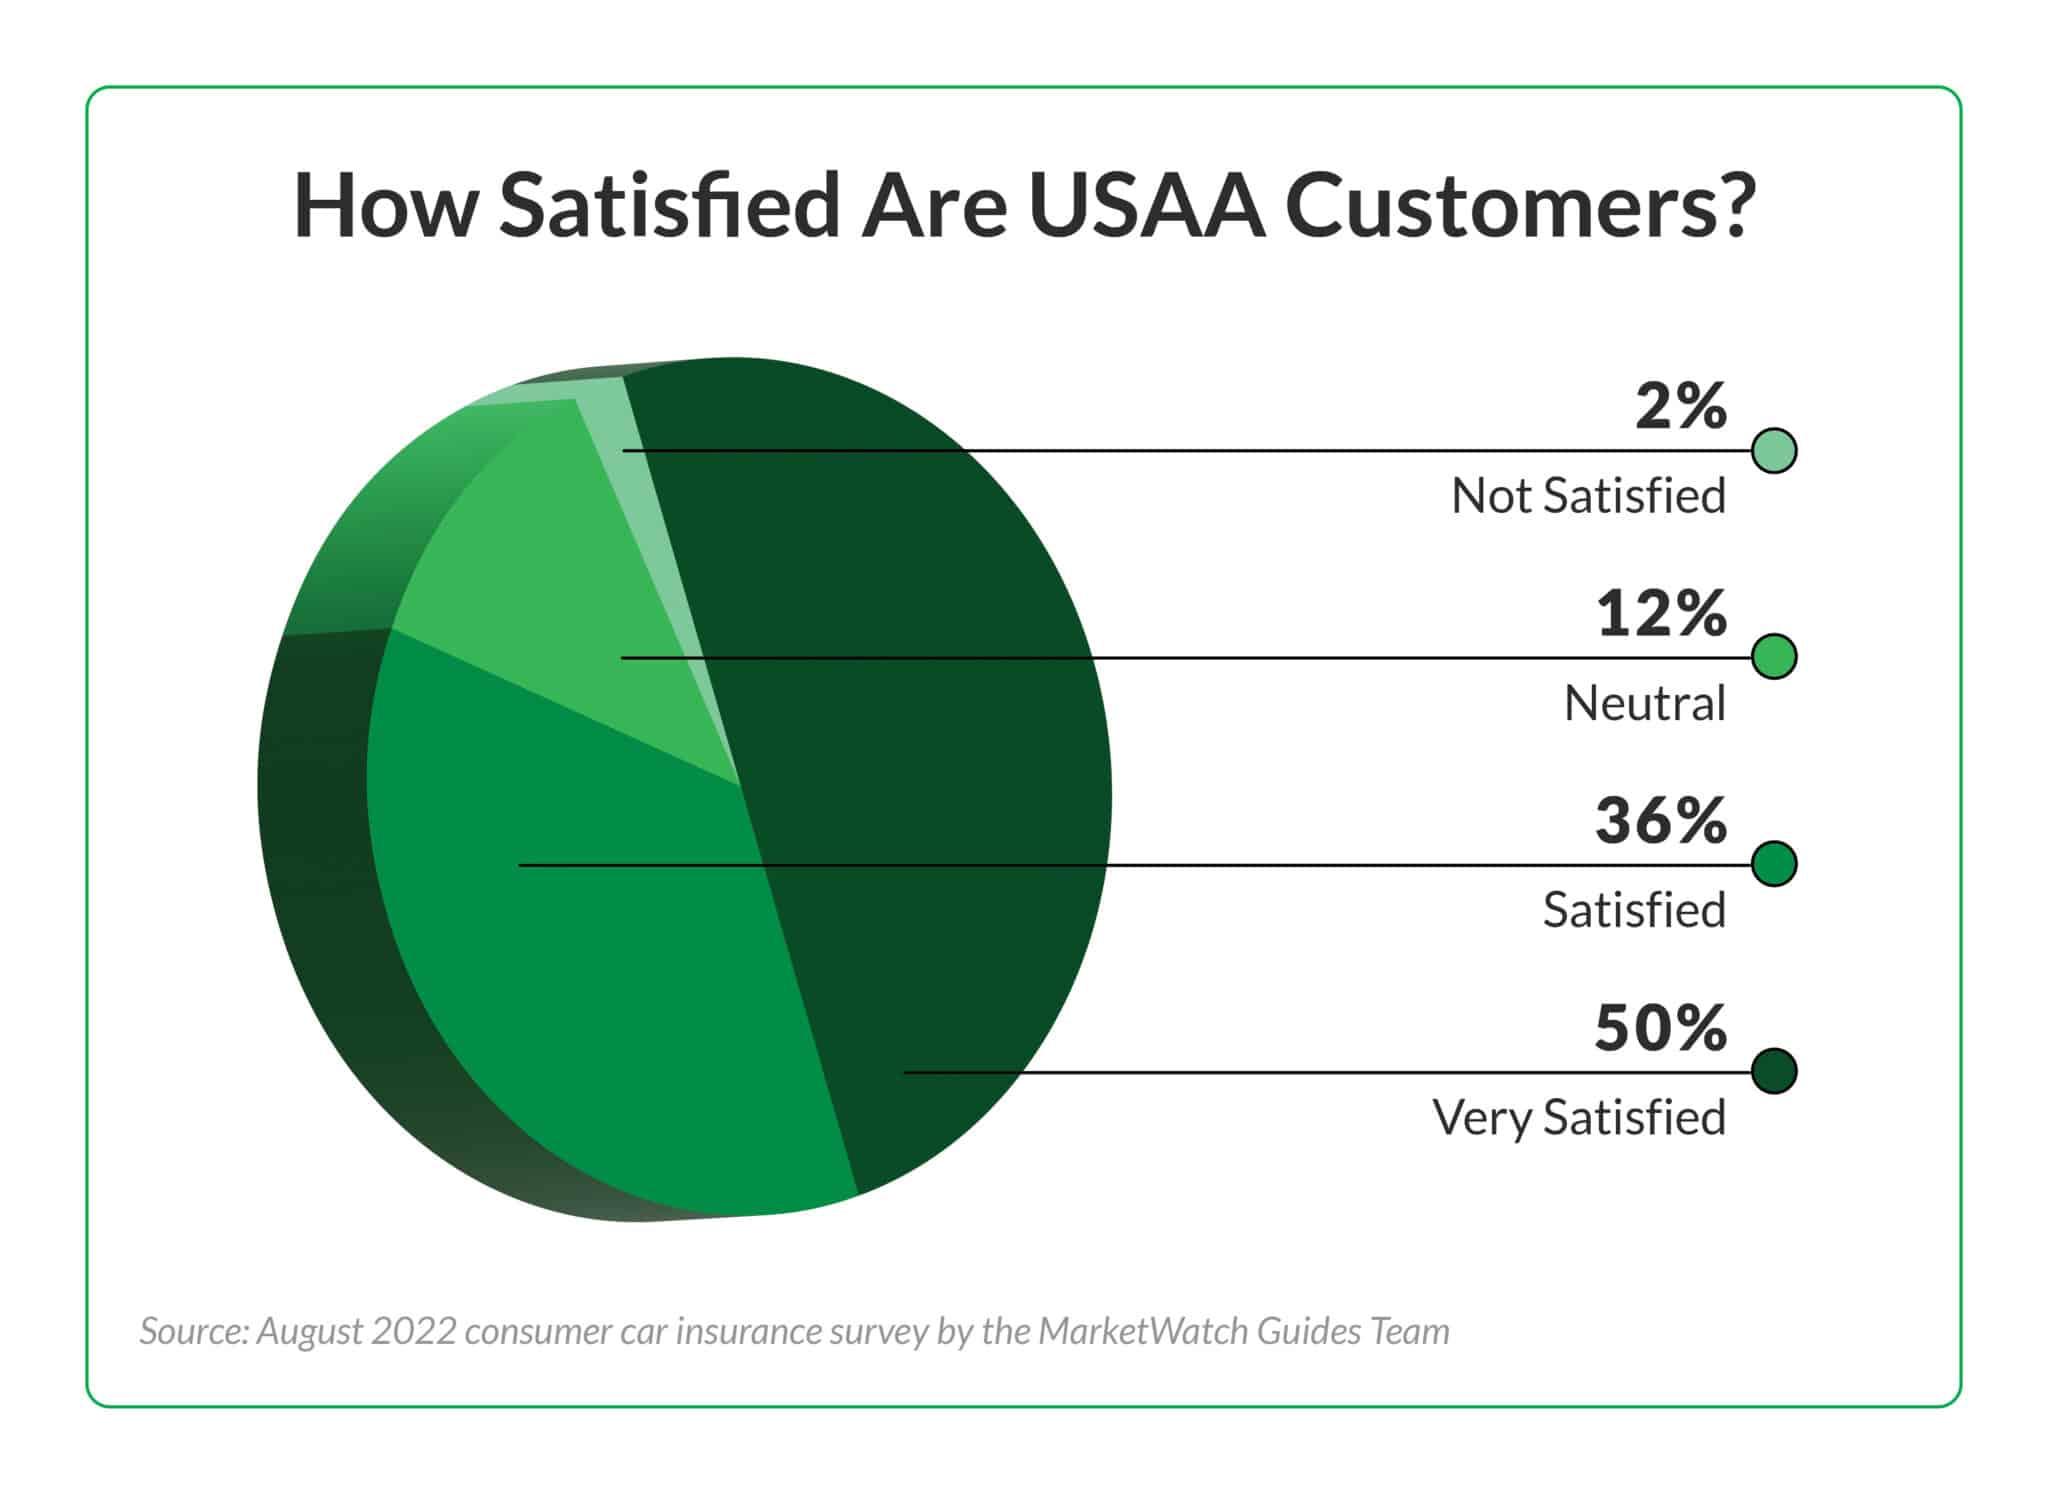 Pie chart that shows the satisfaction levels of USAA policyholders